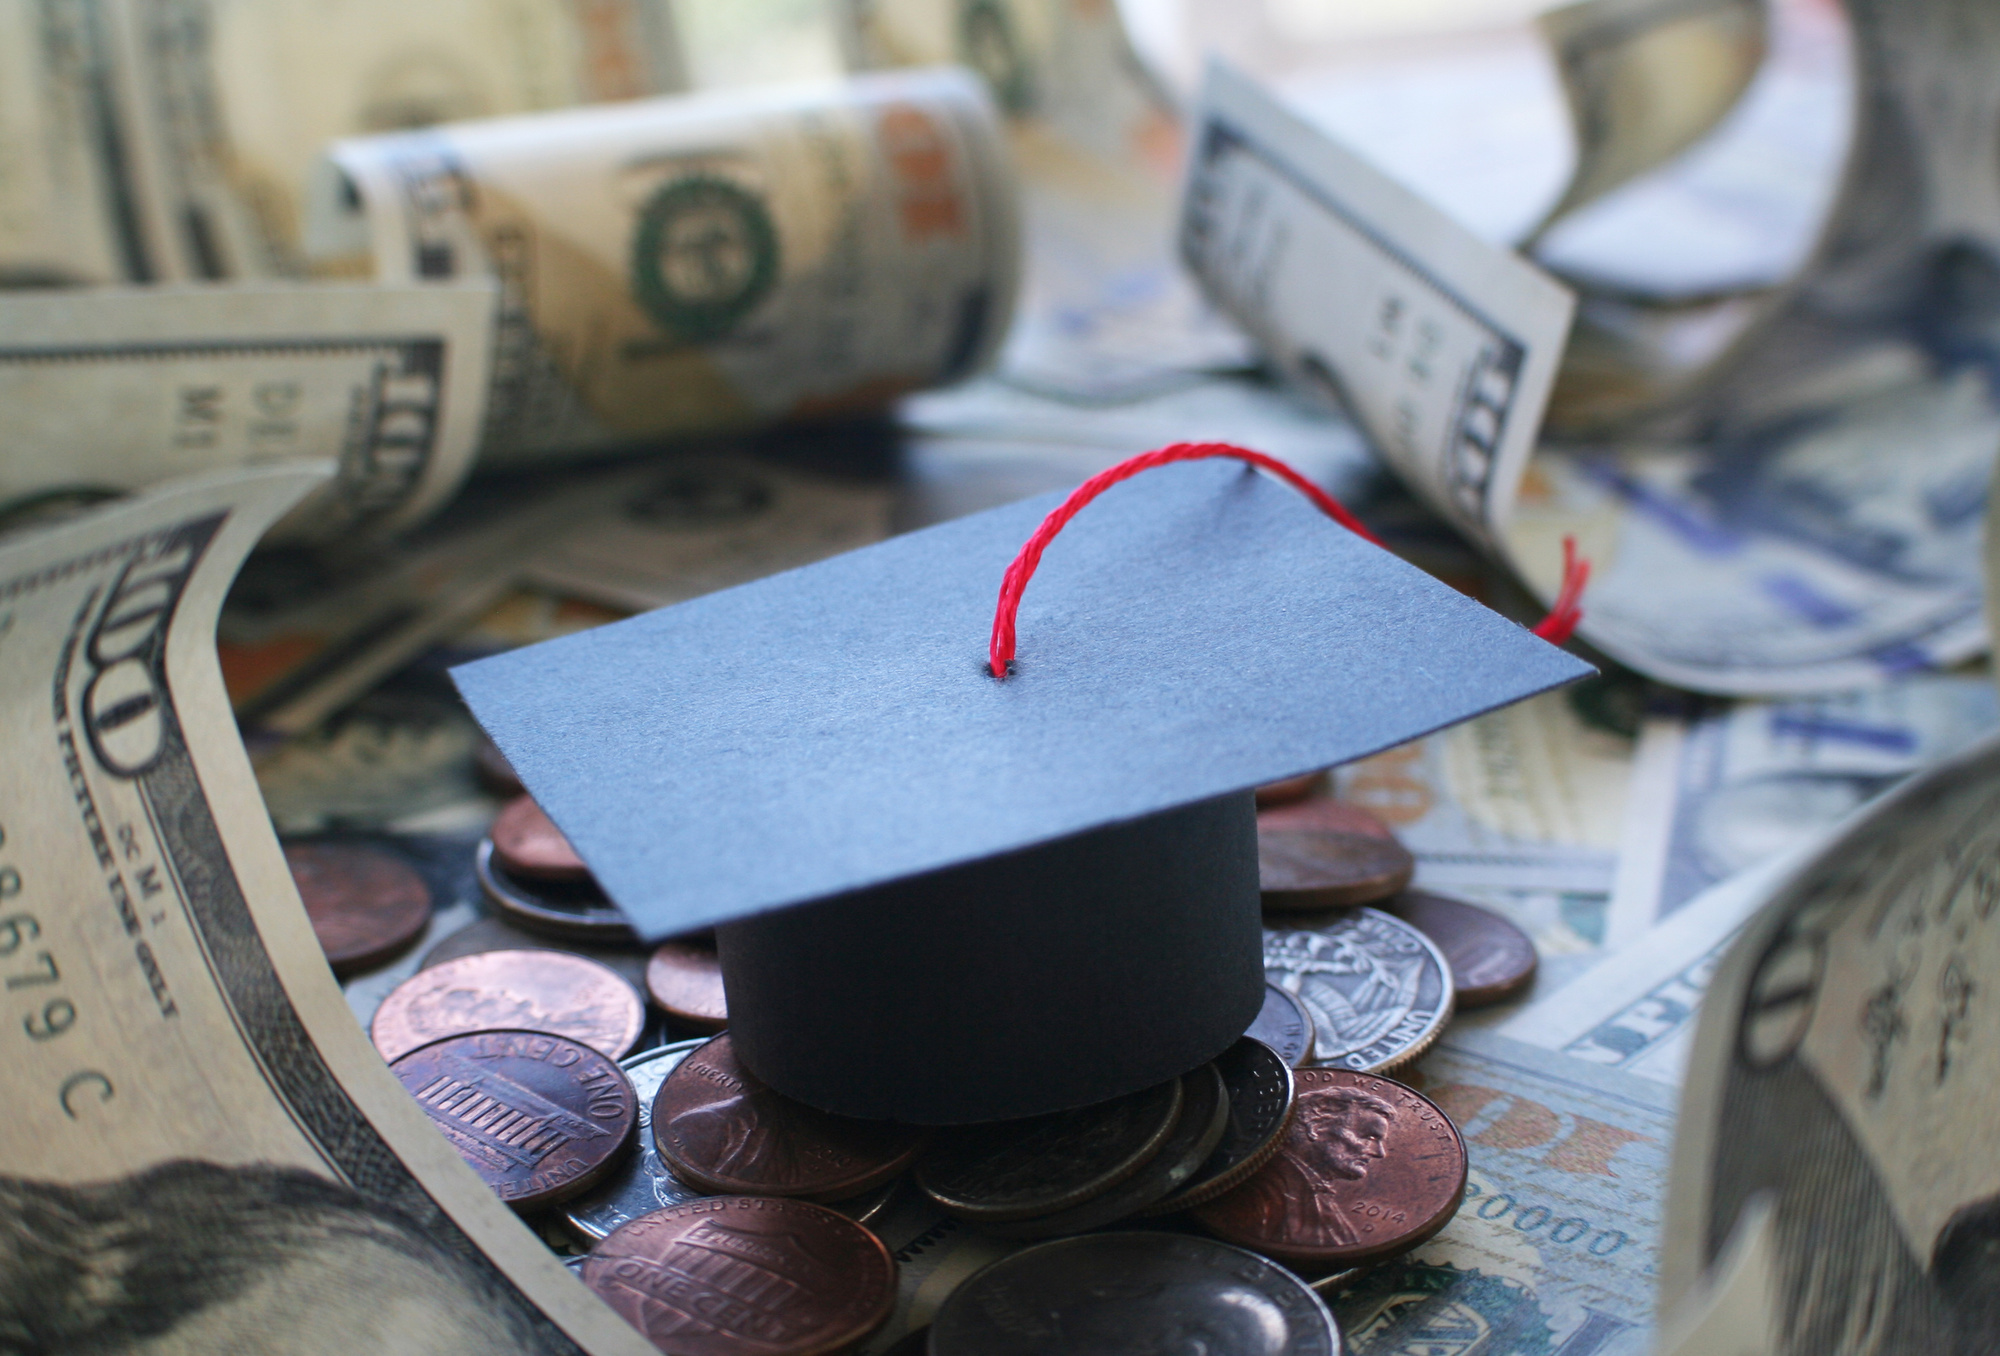 Consolidating Private or Federal Student Loans: What’s the Difference?